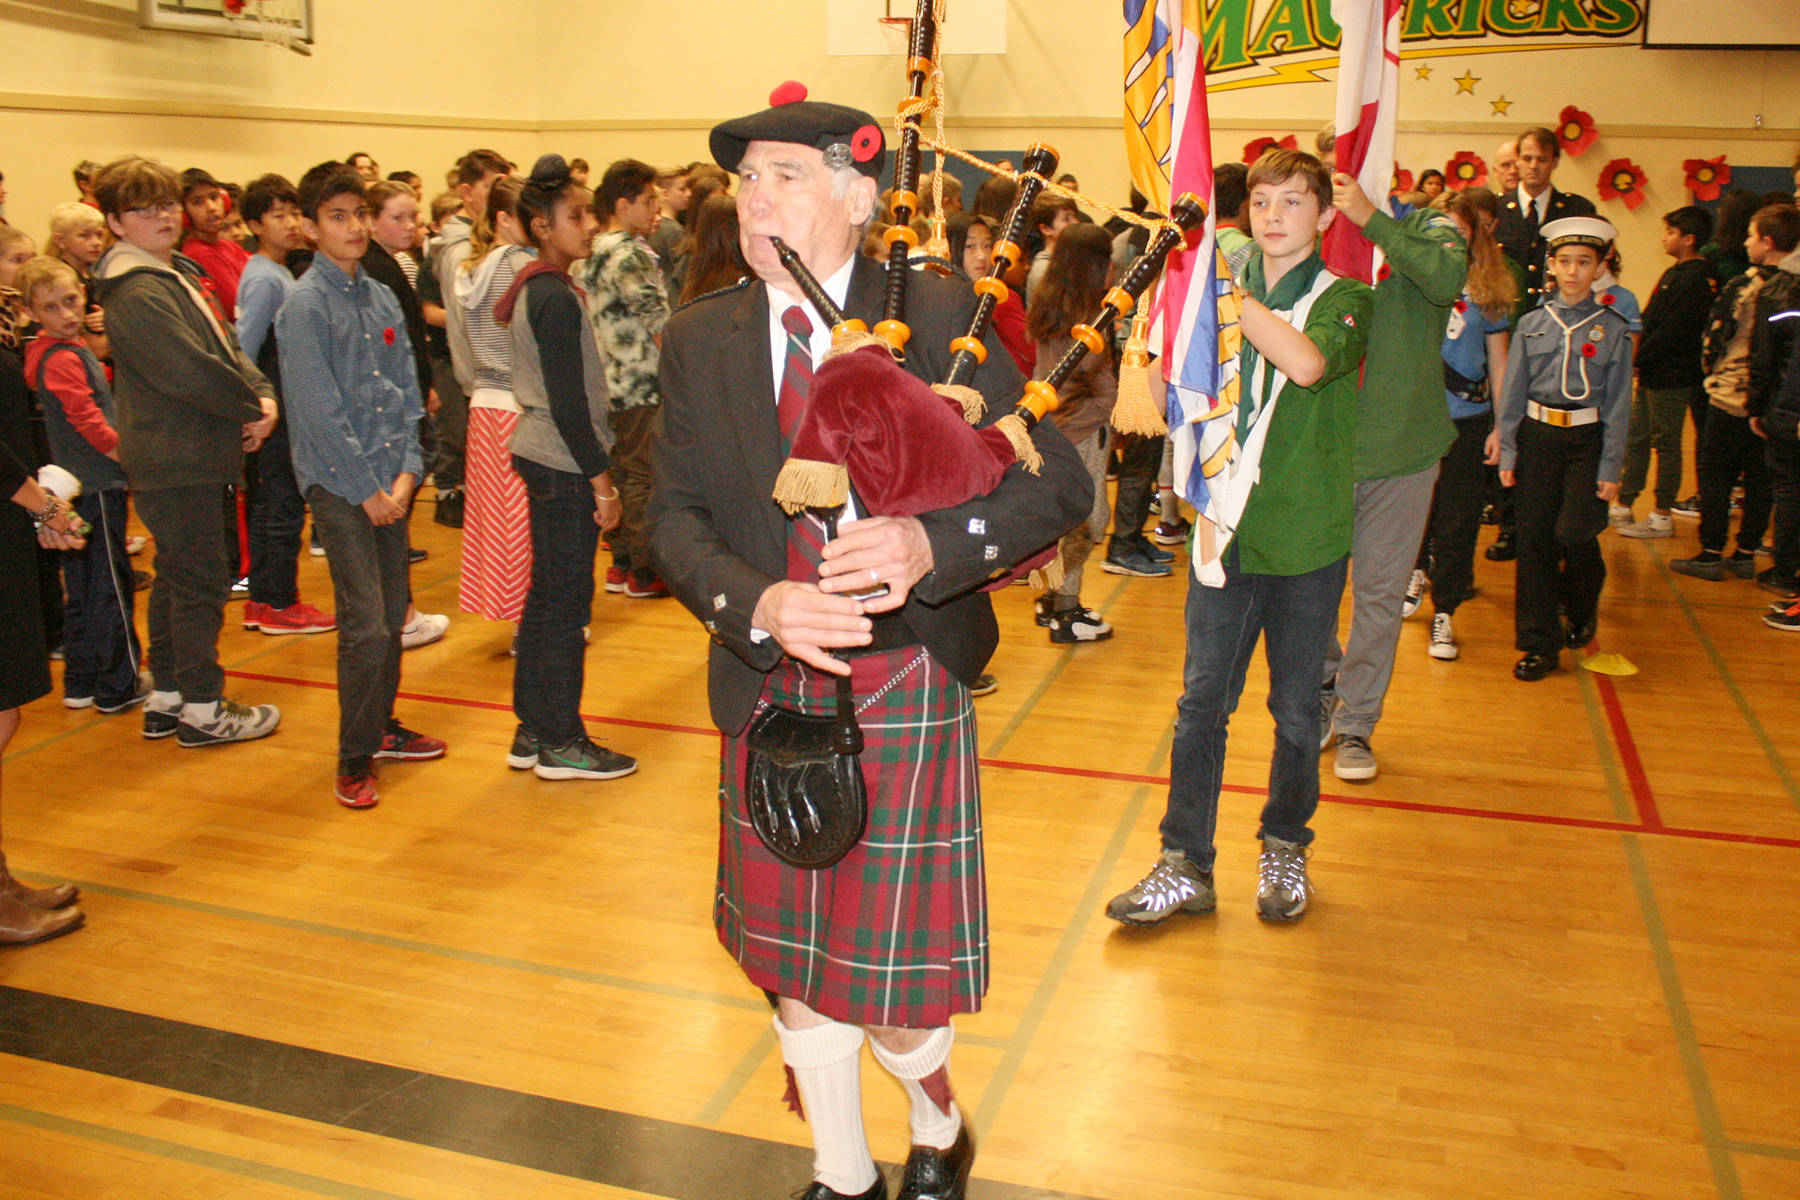 9332771_web1_171117-sne-remembrance-day-glanford-middle-school_6